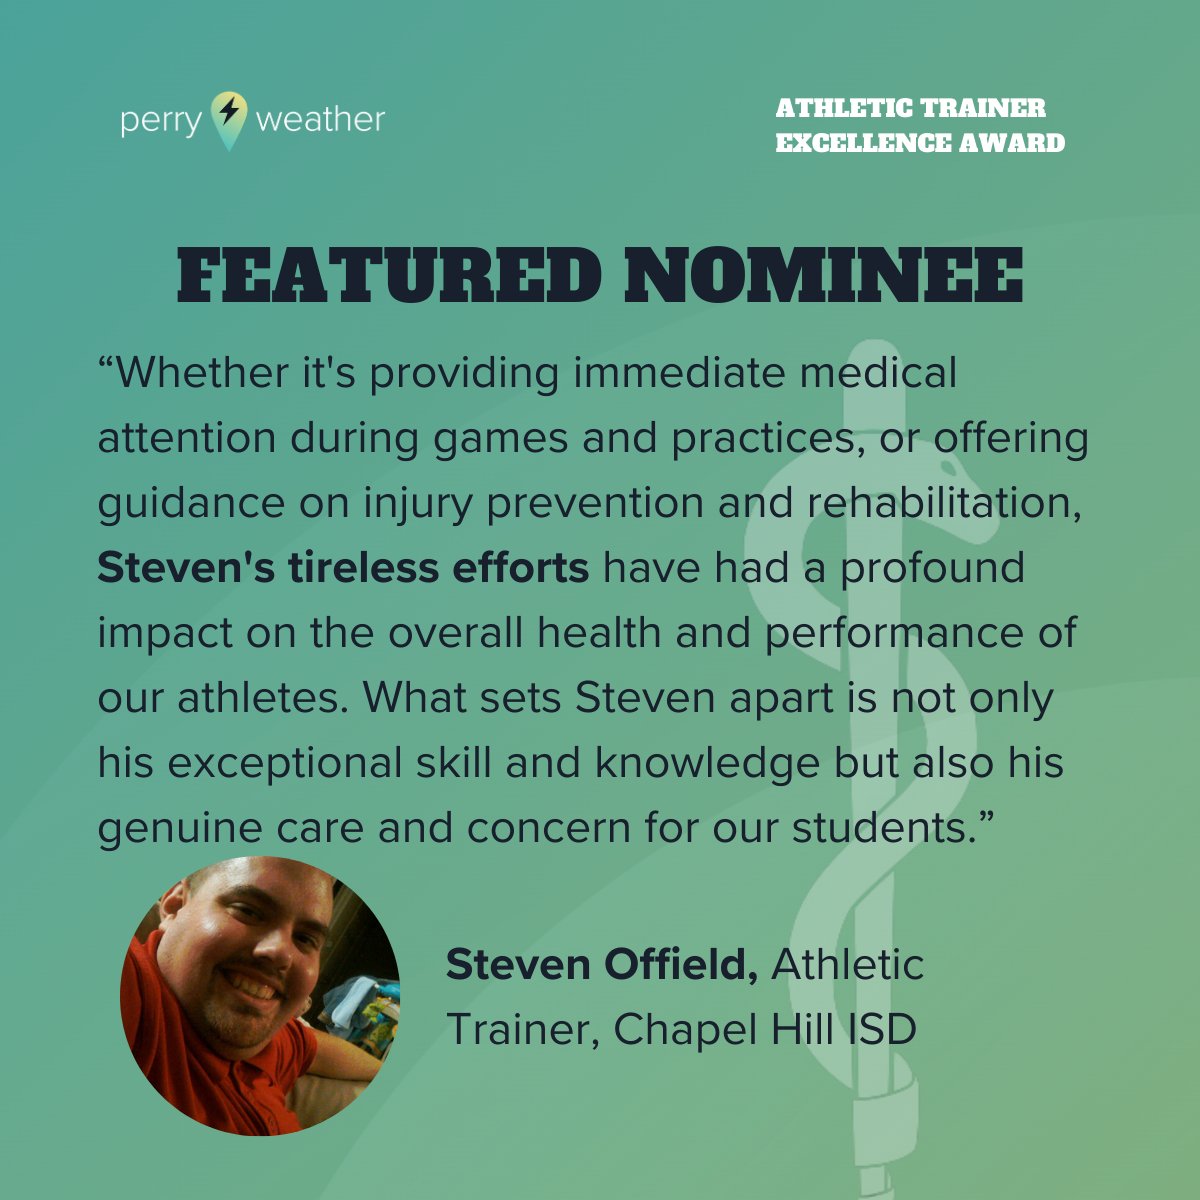 Our featured AT Excellence Award nominee is @DawgTrainer2020 Steven Offield, Athletic Trainer at @ChapelHillISD Know a great AT who deserves this award? Nominations are open until March 31st at 11:59PM CST. Head to the link below to learn more and nominate an AT today!